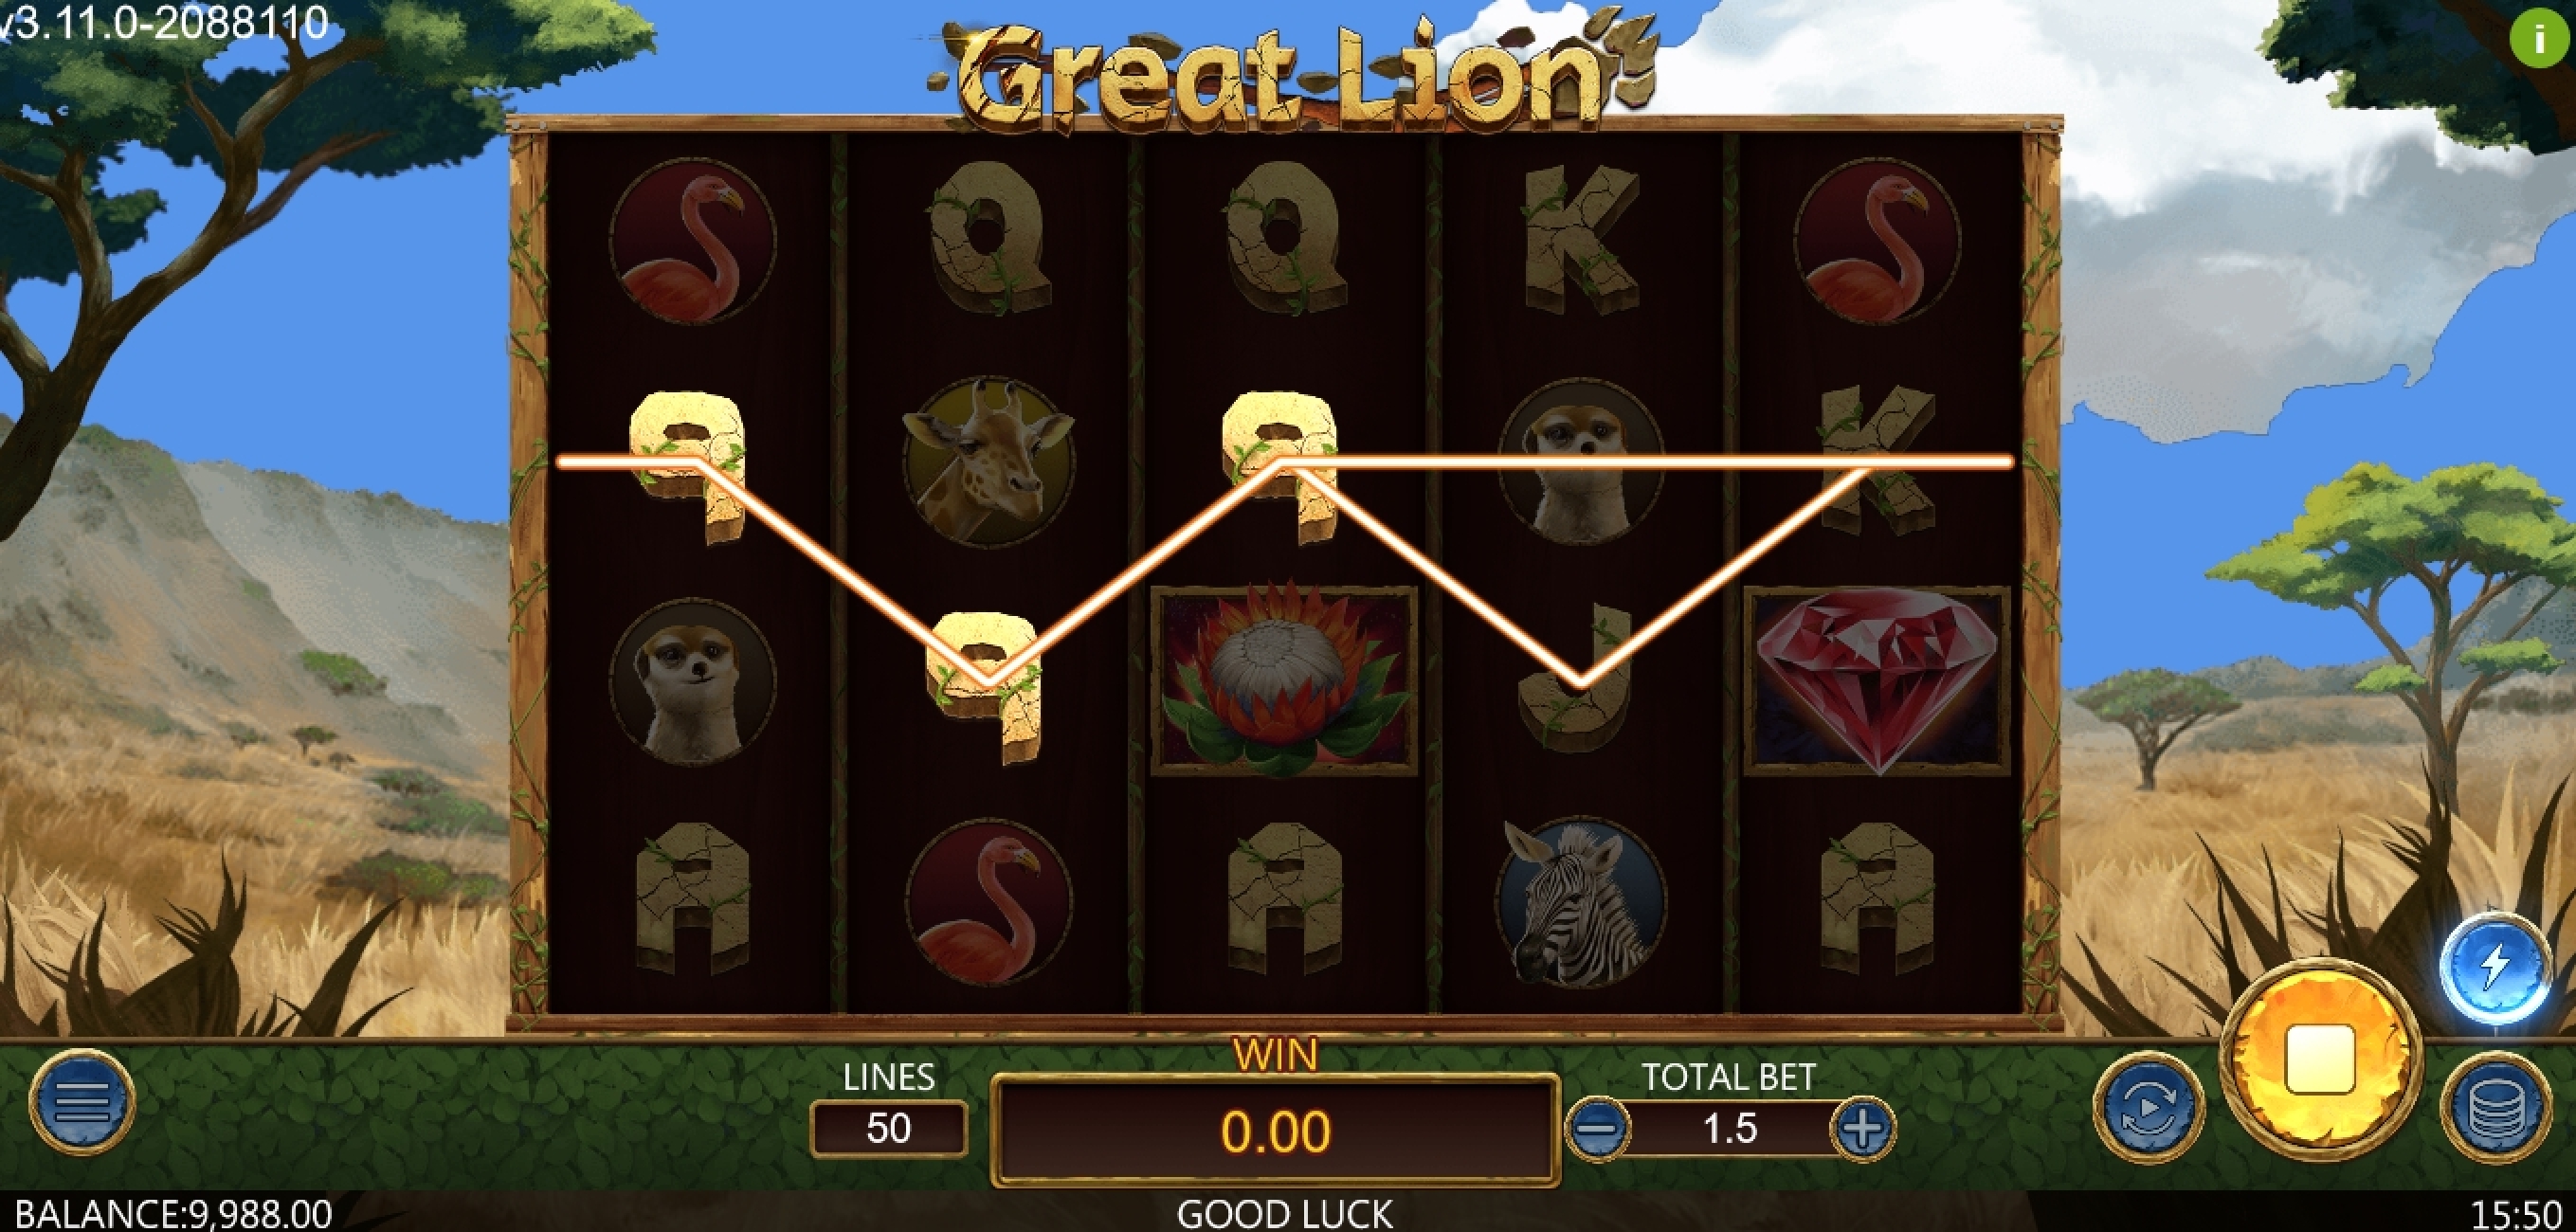 Win Money in Great Lion Free Slot Game by Dragoon Soft